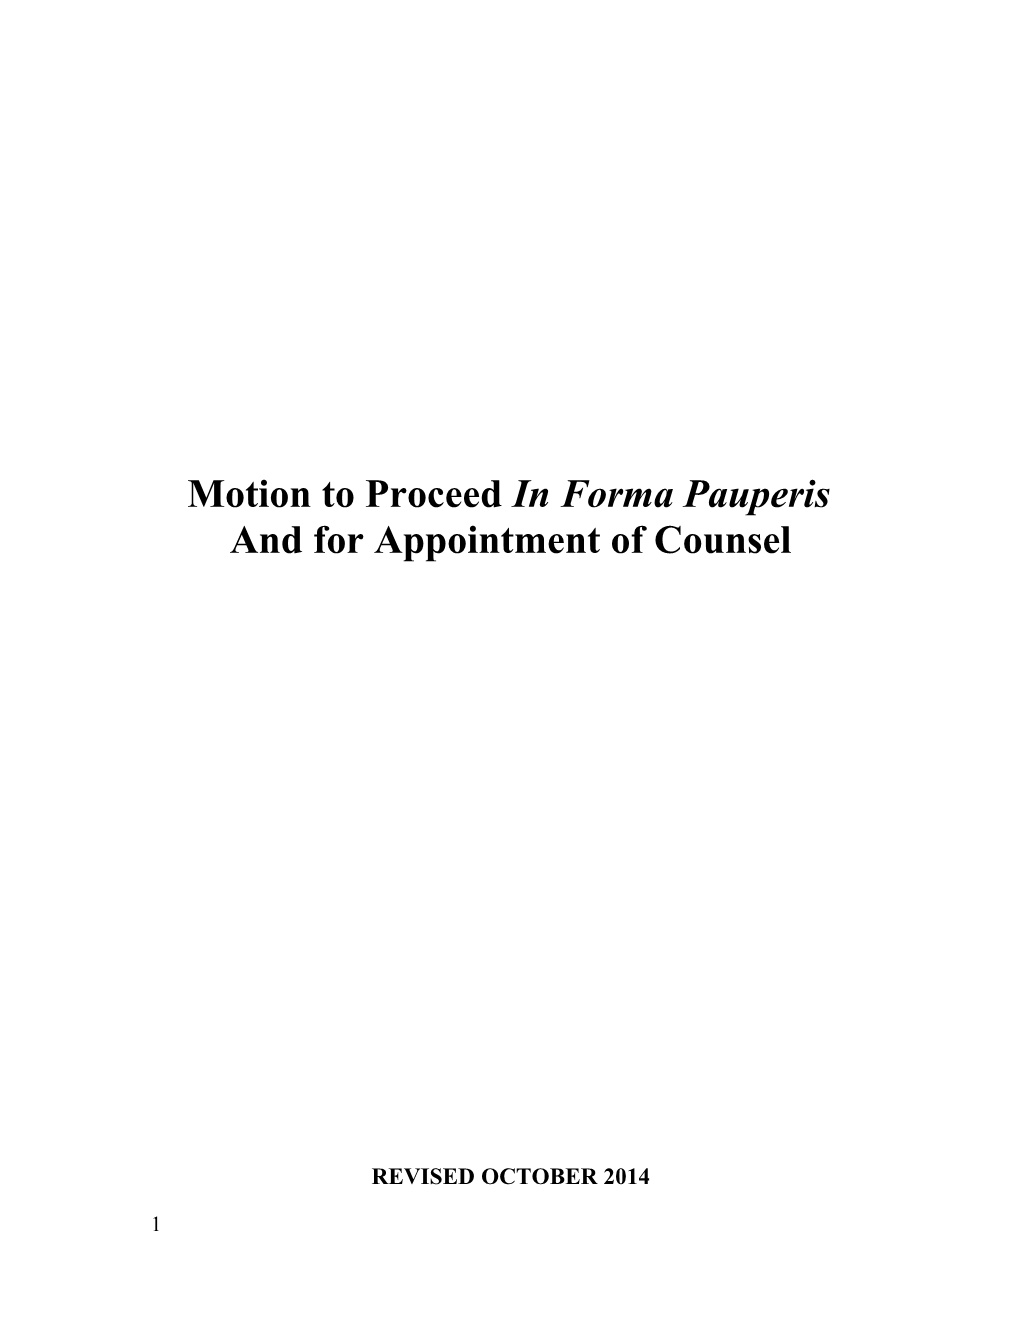 Motion to Proceed in Forma Pauperis